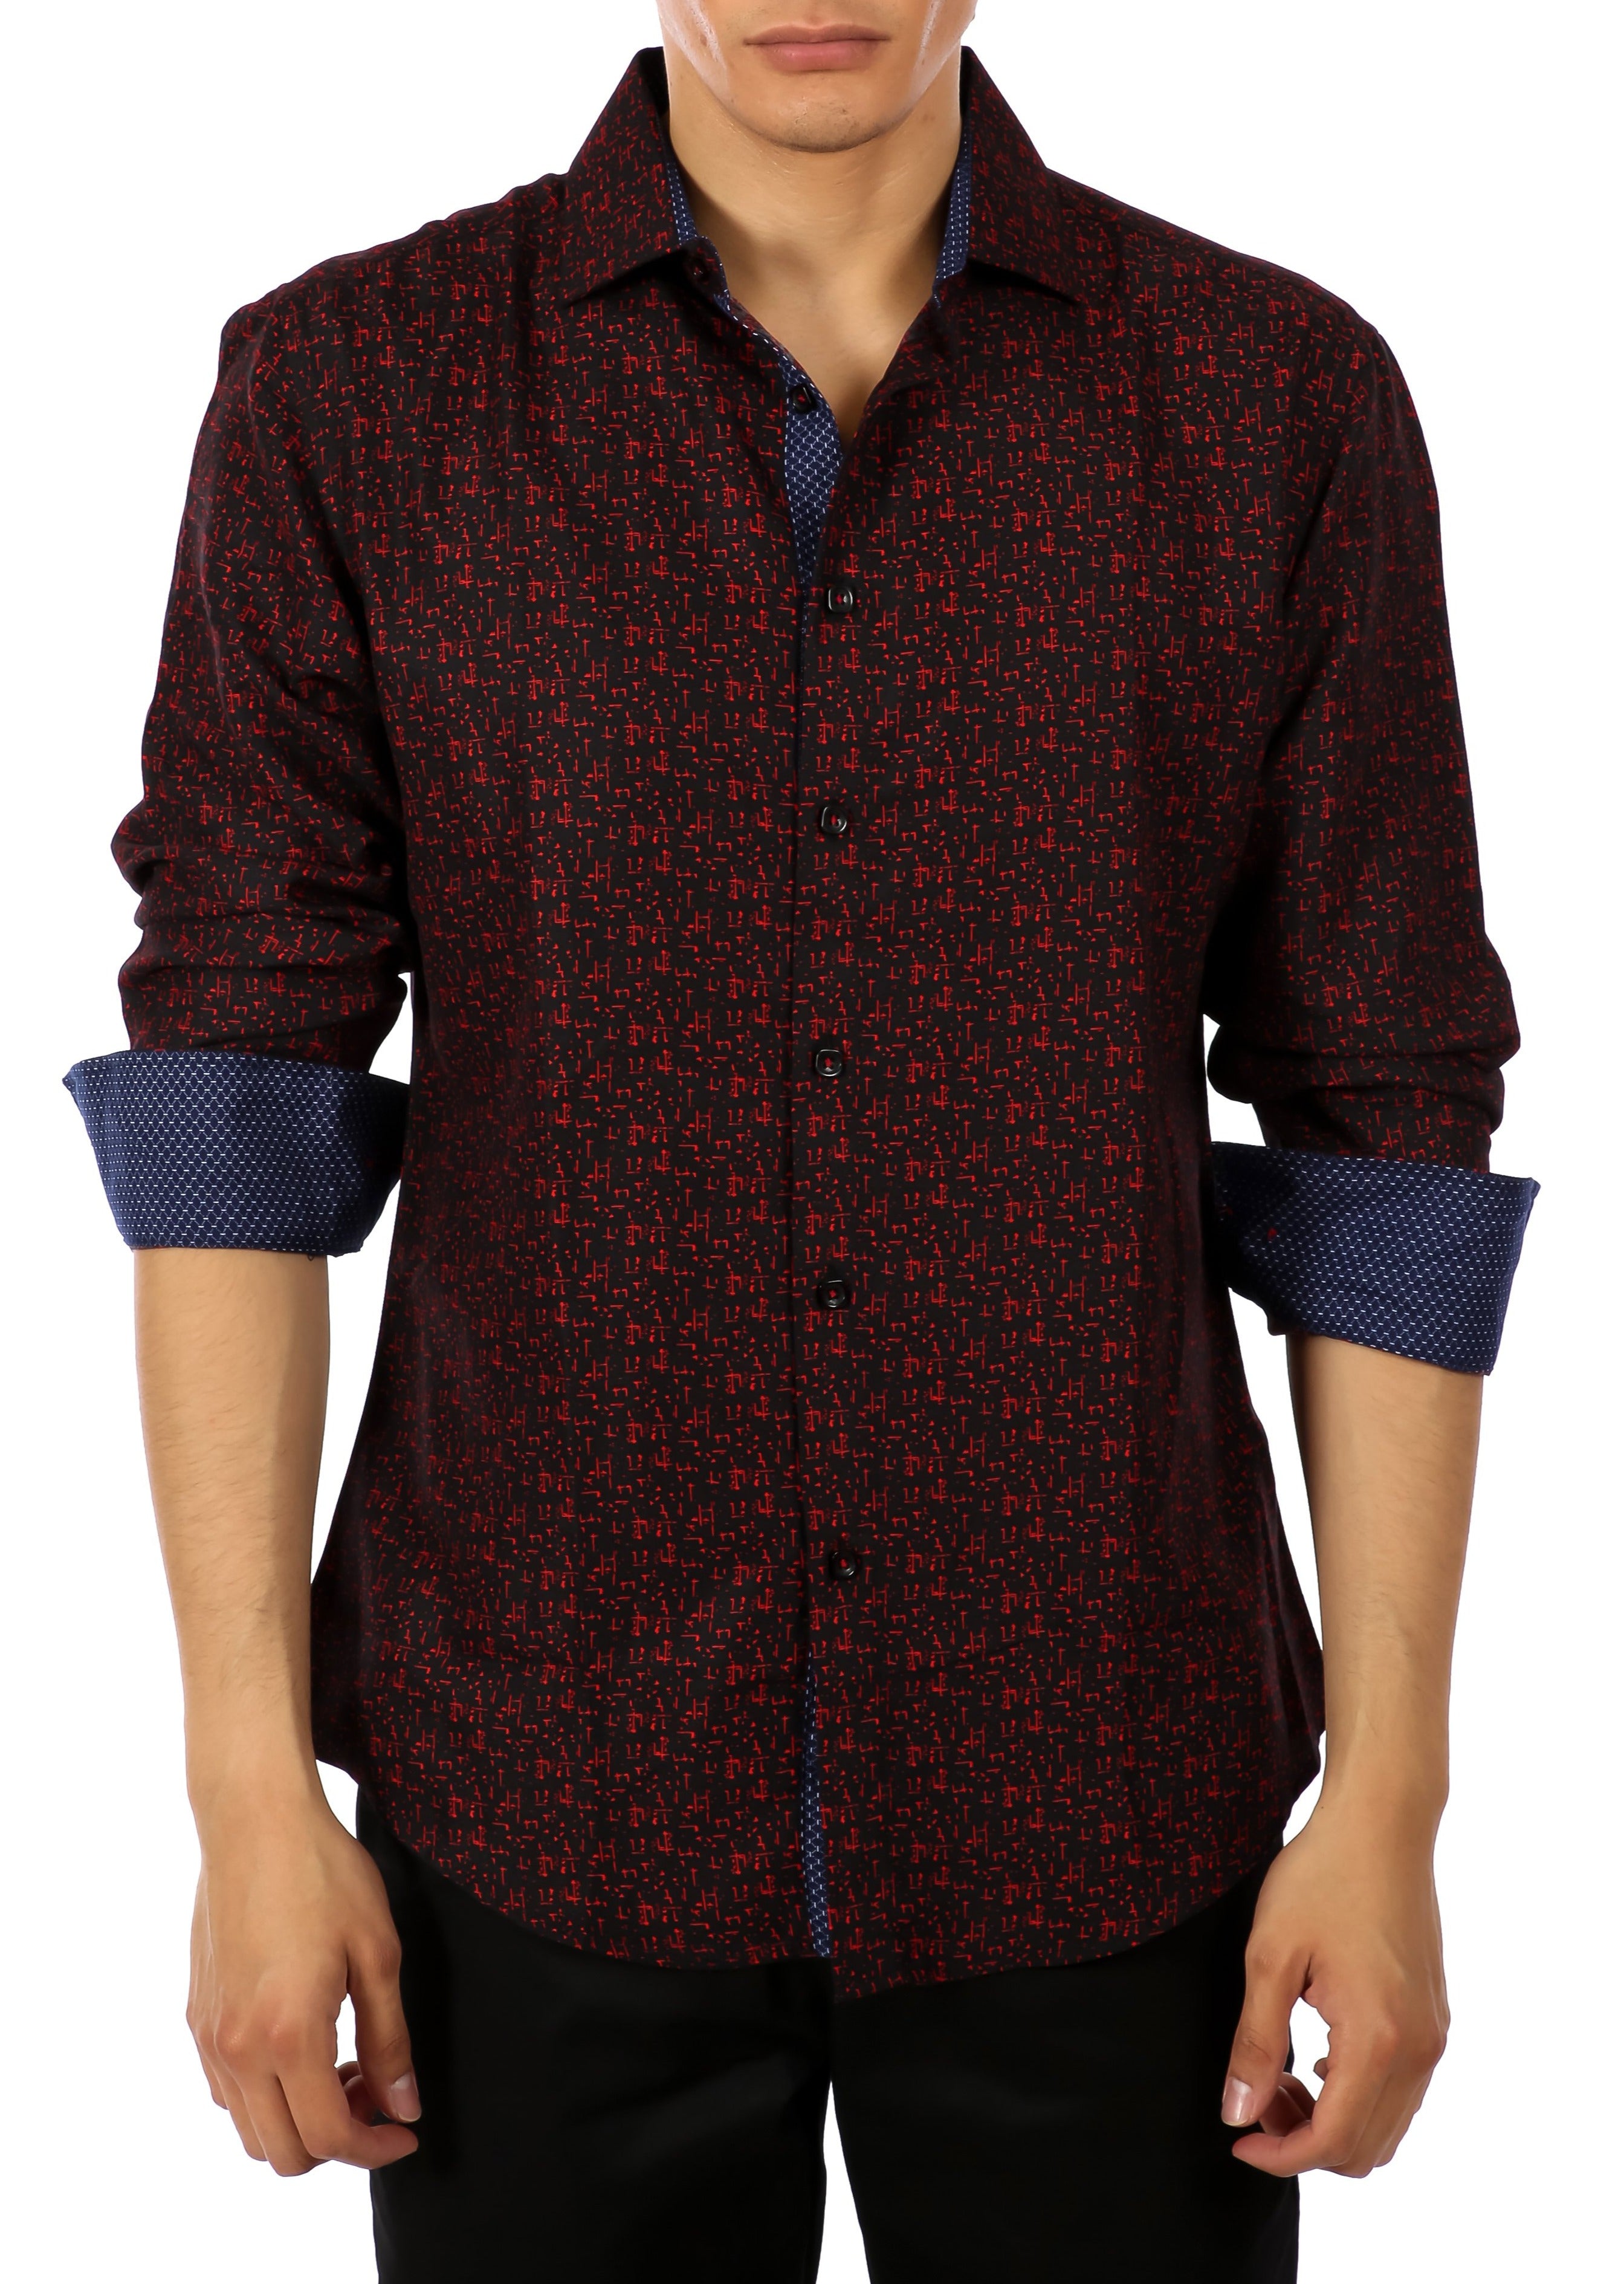 mens red button up